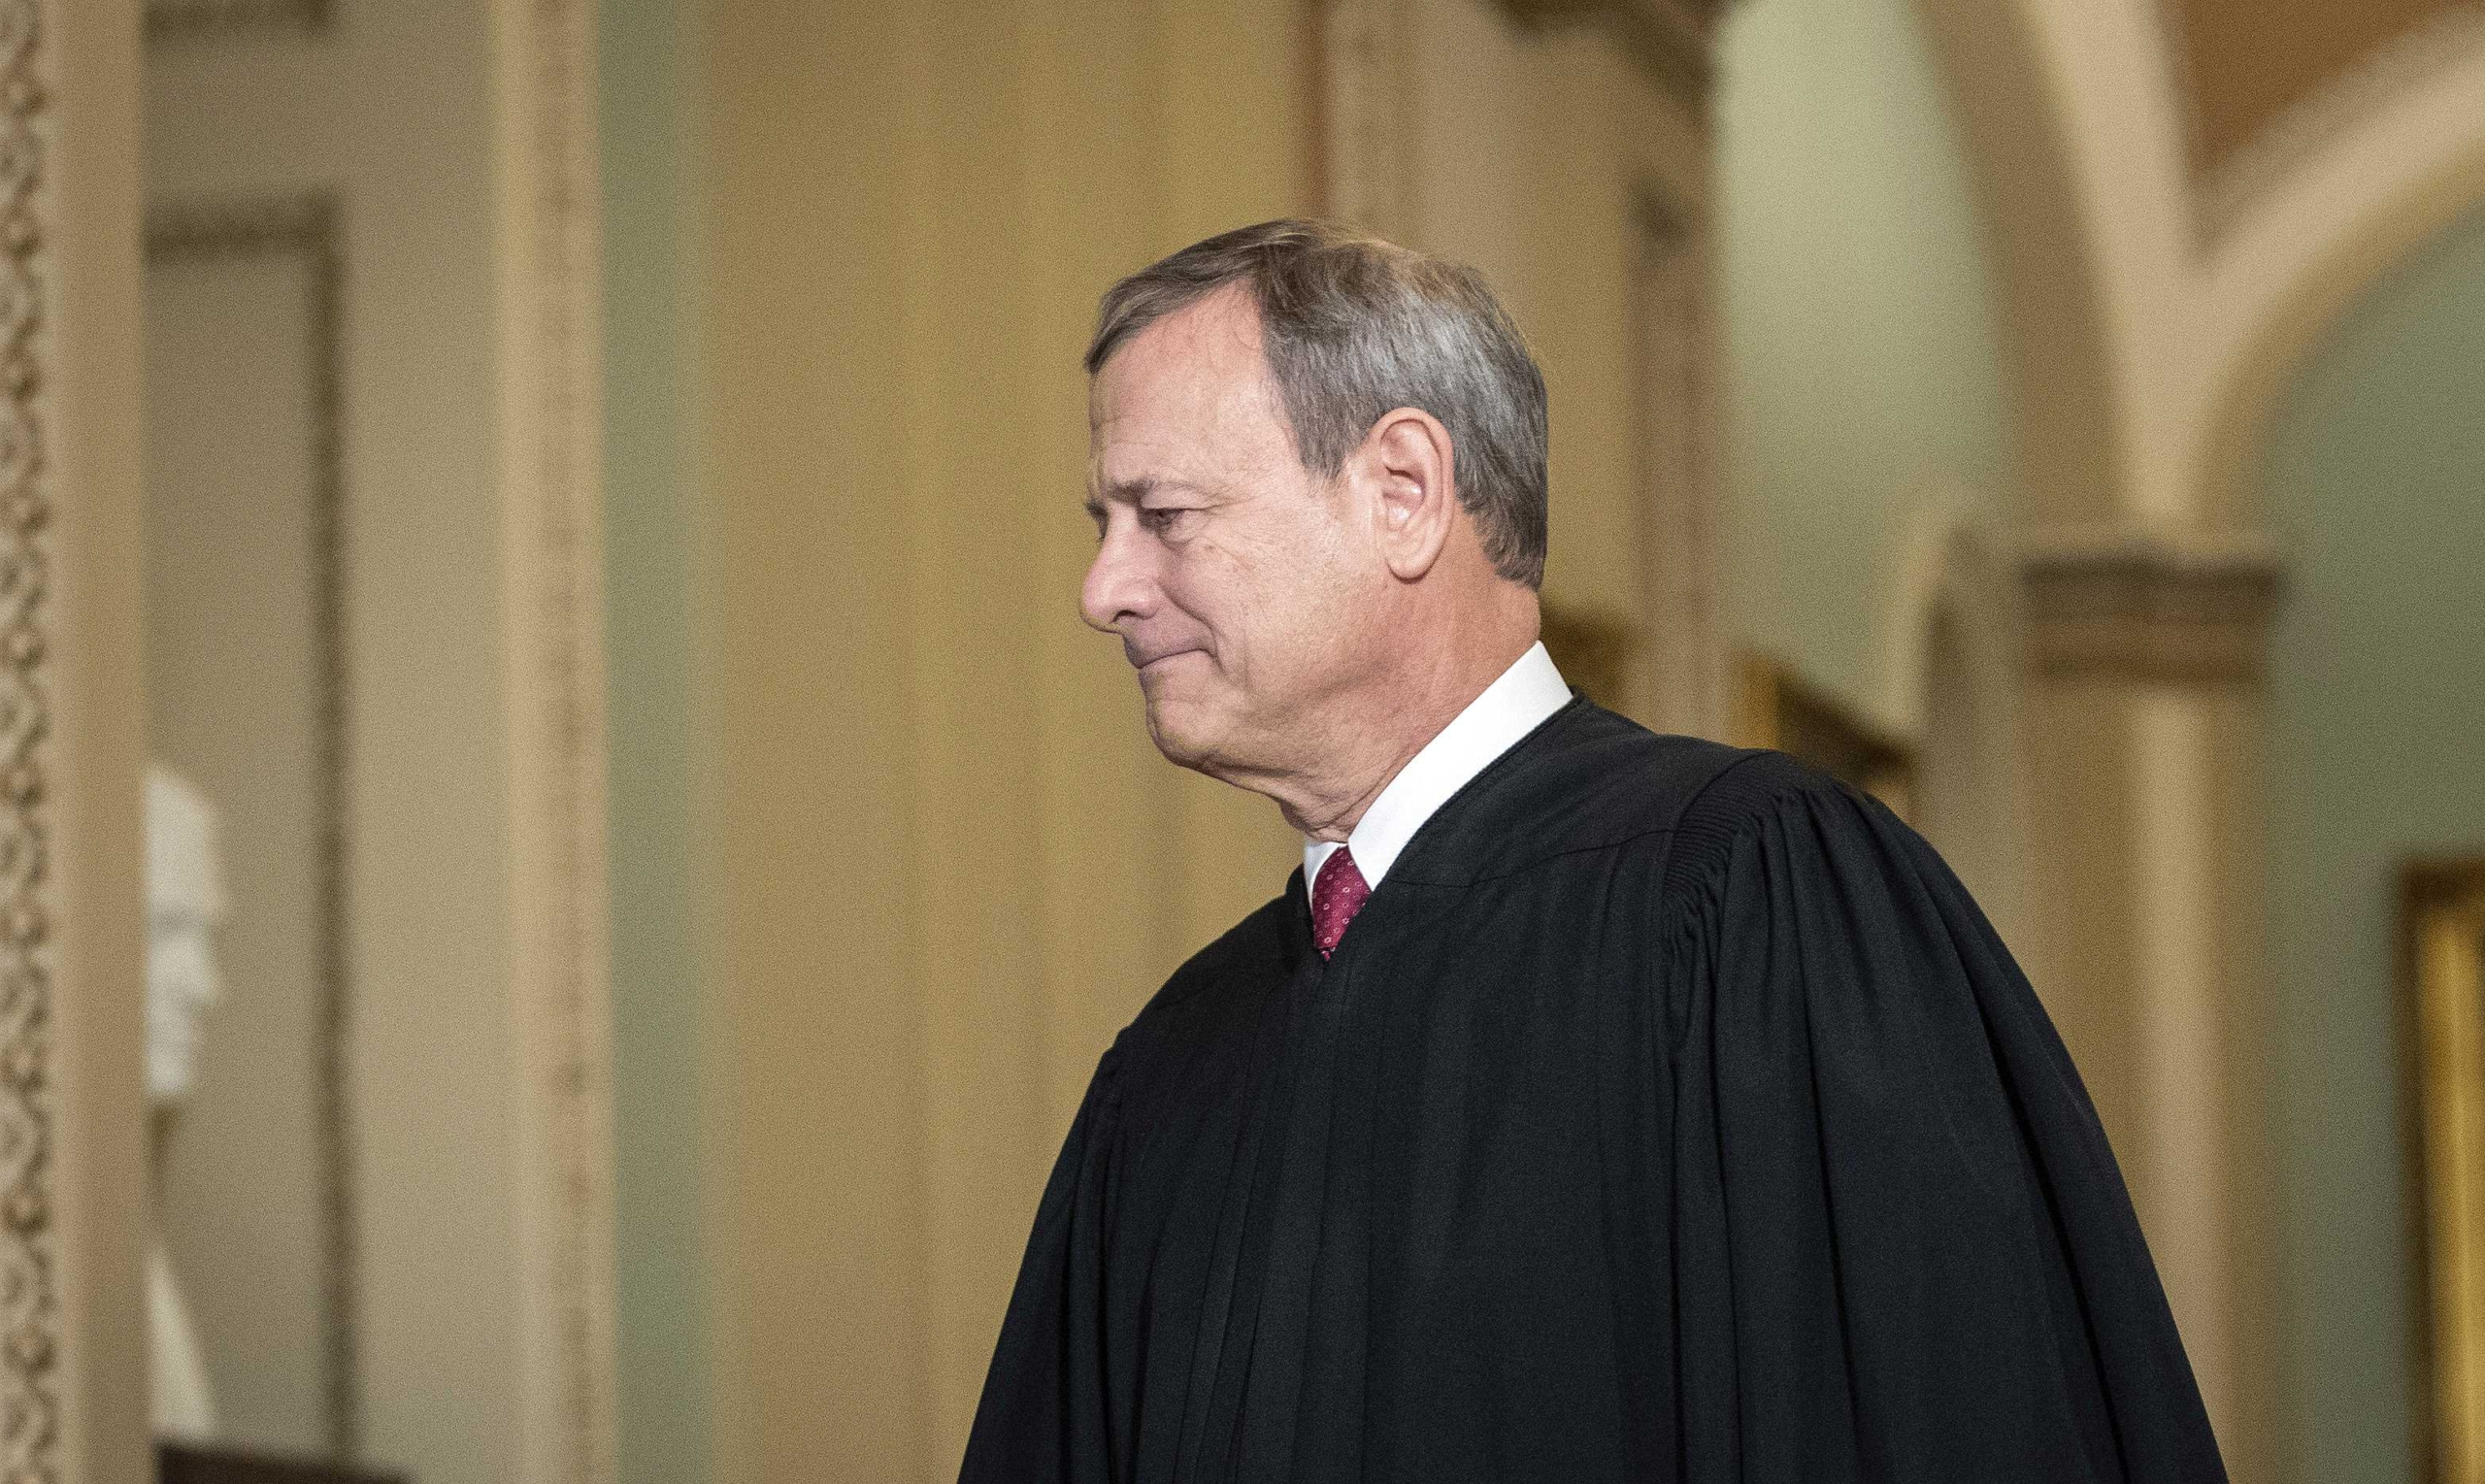 John Roberts Doesn’t Want to Preside Over Trump’s Second Impeachment Trial: Schumer